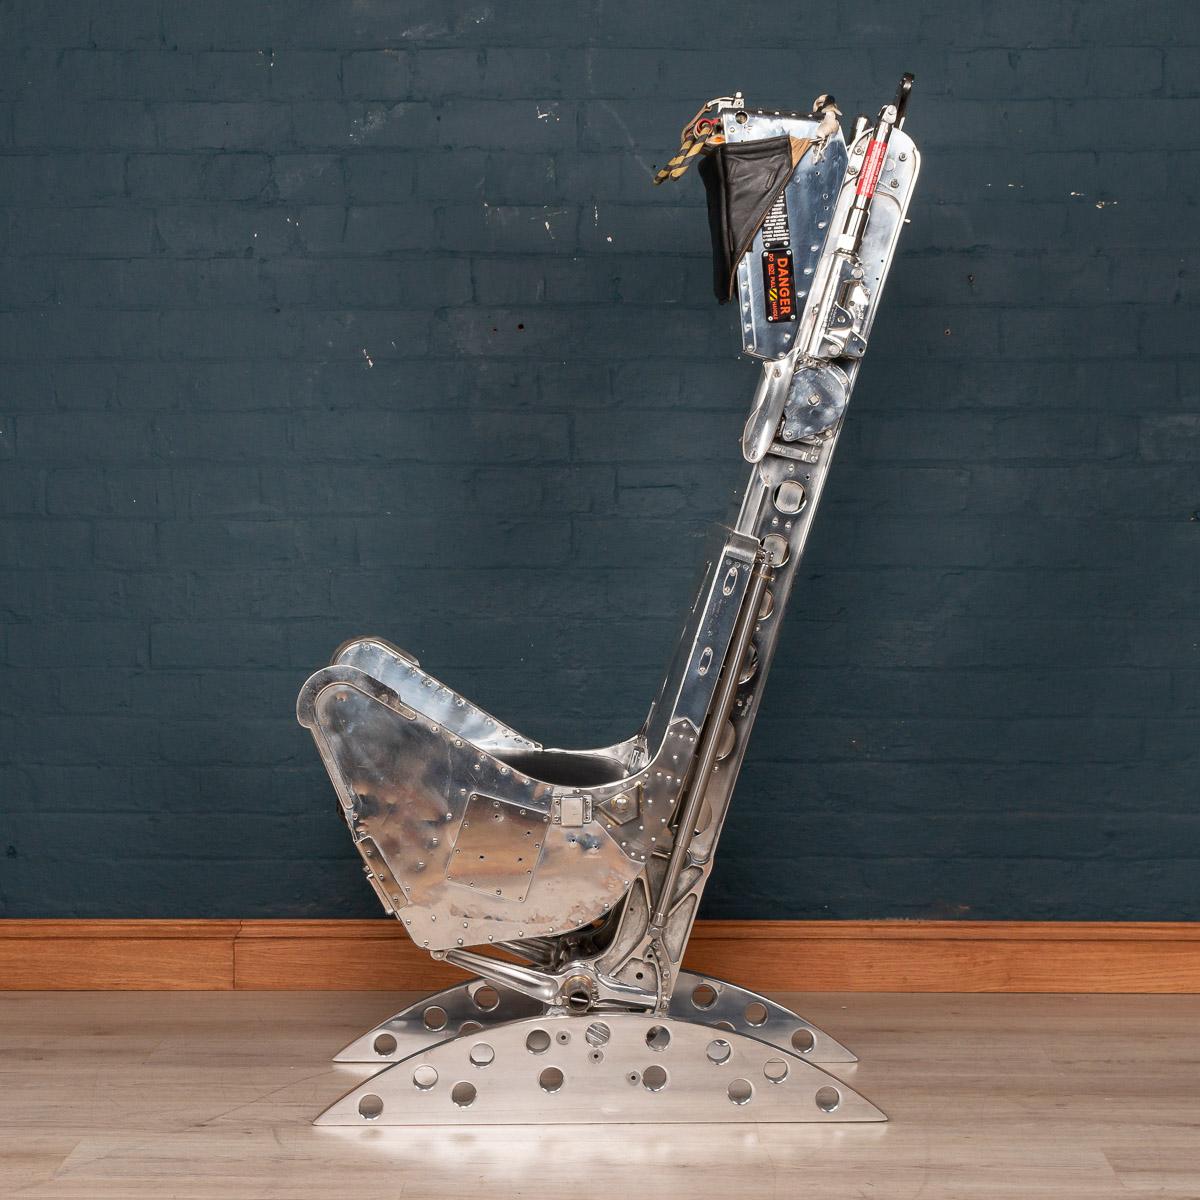 A fantastic ejection seat made by Martin Baker made for the Royal Air Force Canberra Jet which were in operation in the early 1960s. This superbly detailed, highly polished ejection seat with bespoke leather seat is now a fully functional chair. The